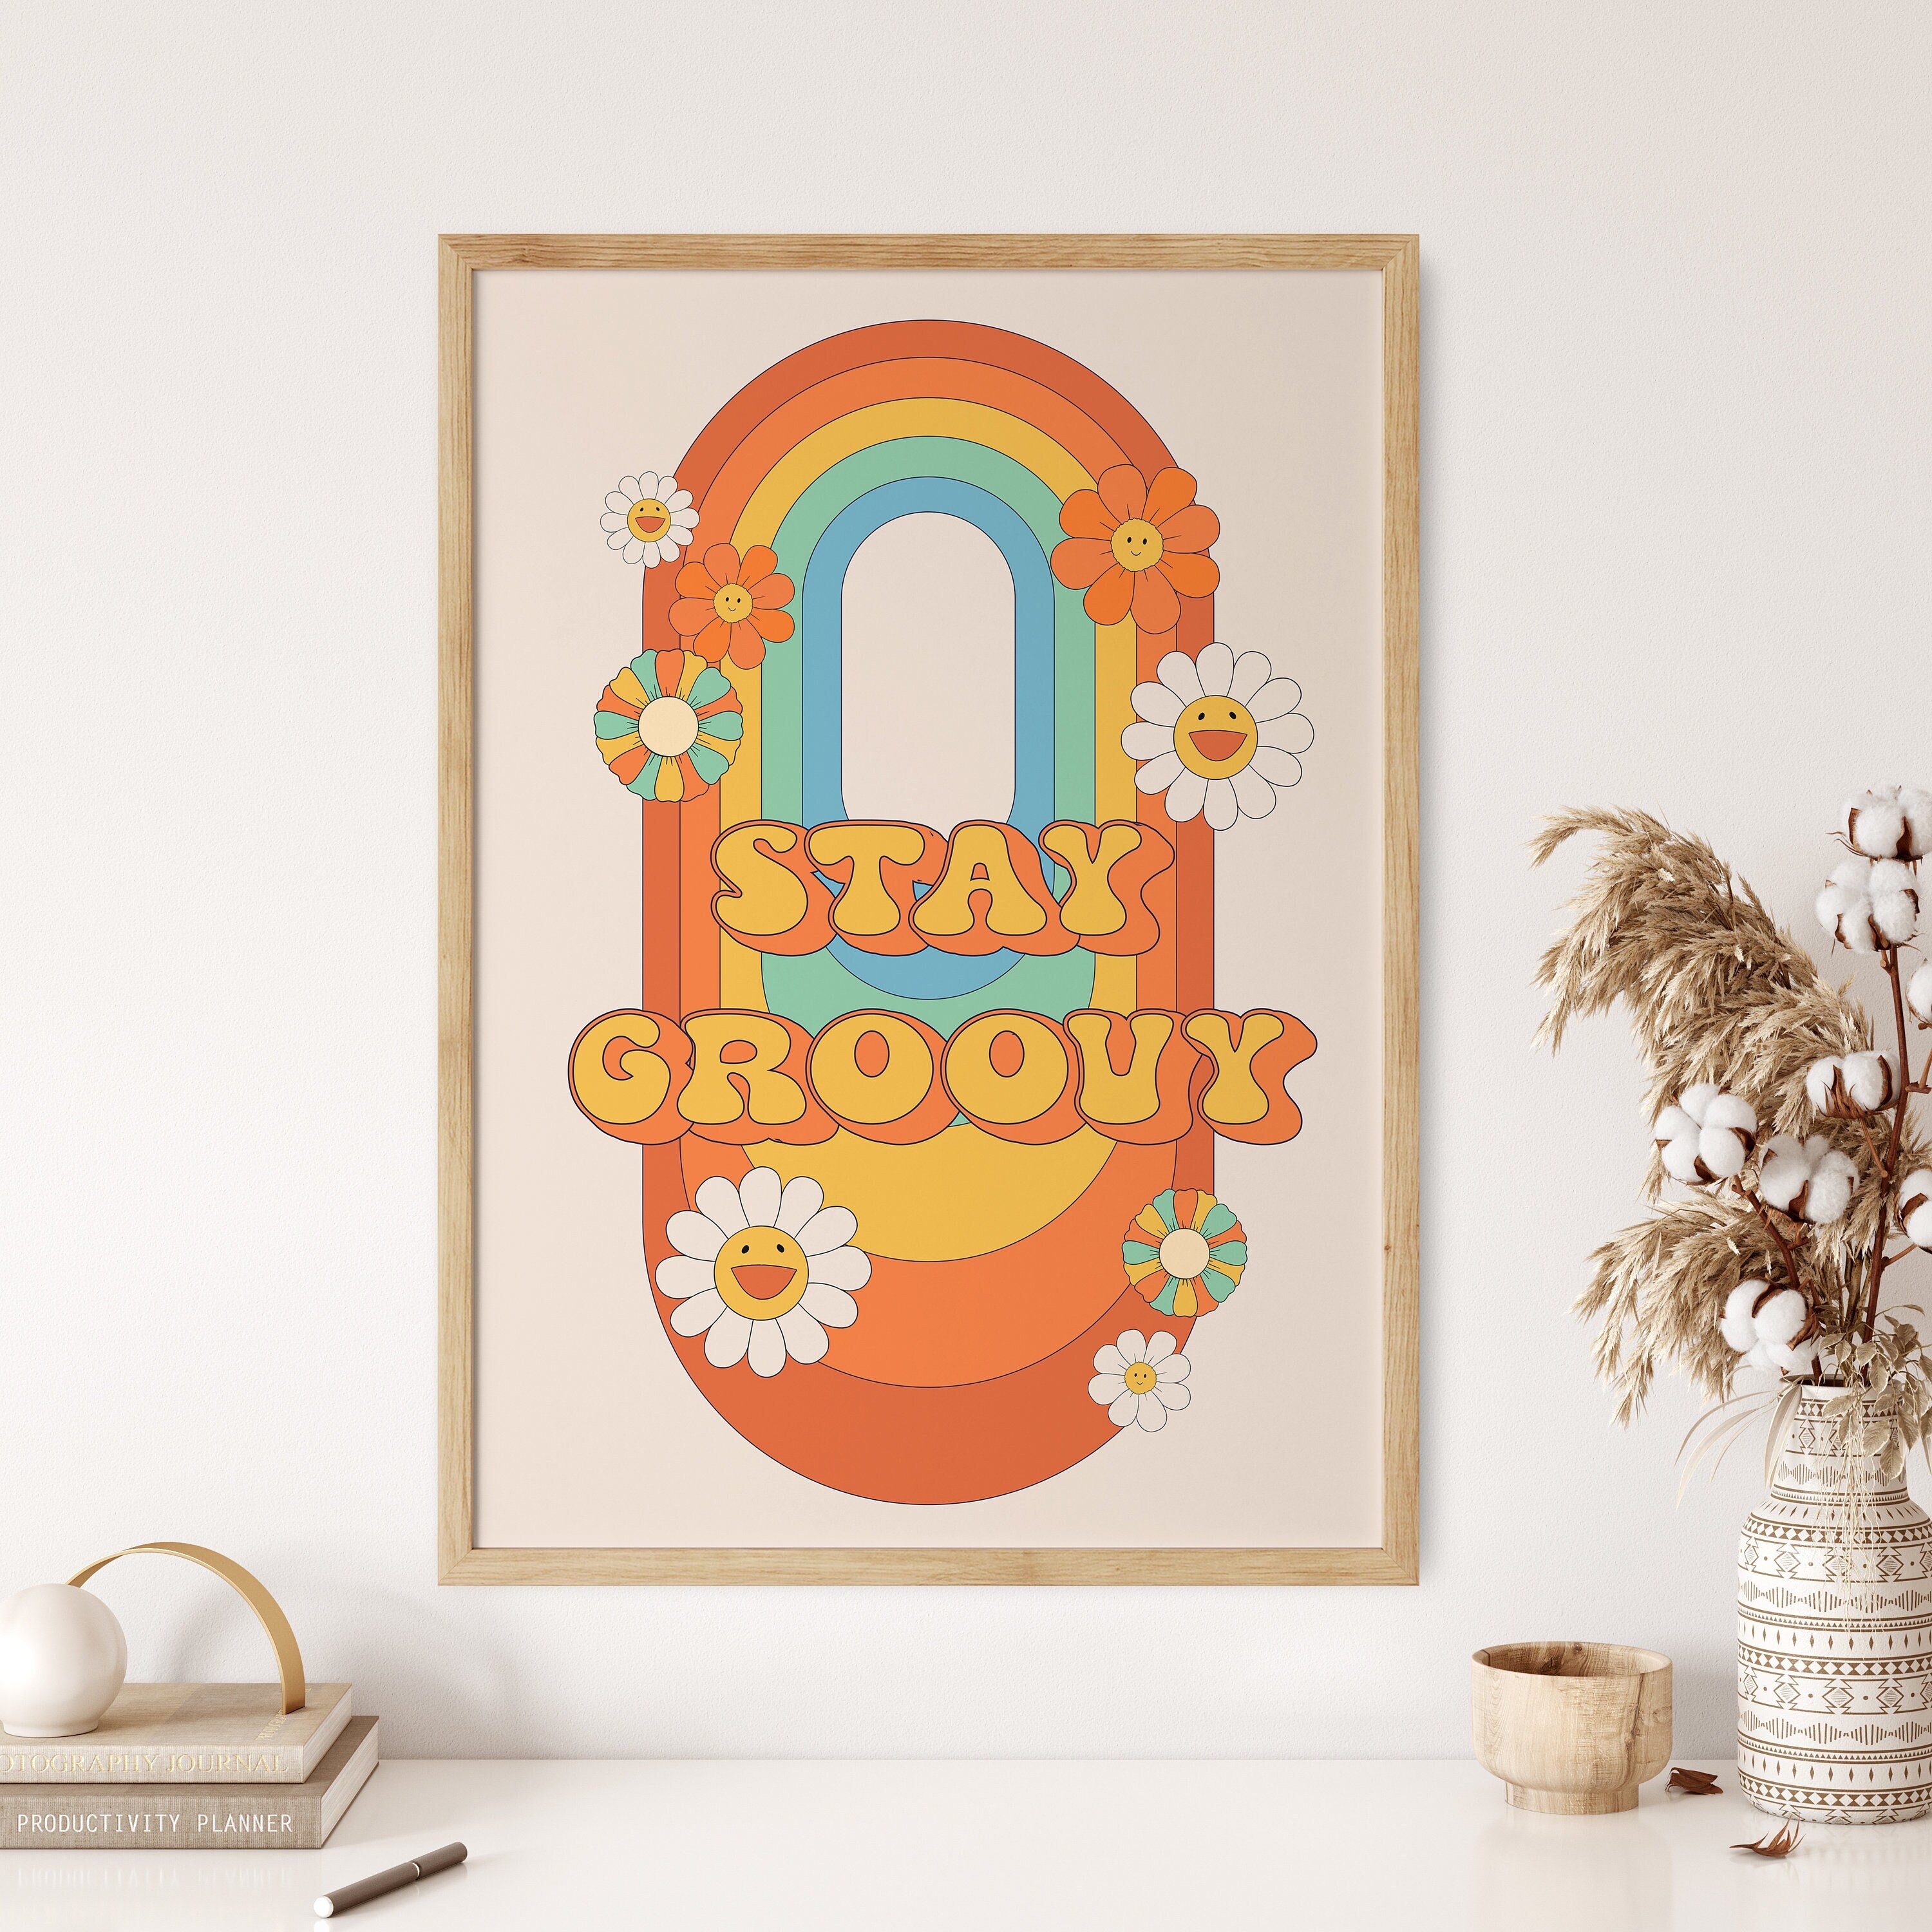 Premium Vector  Retro 70's psychedelic hippie flowers illustration print  with groovy slogan for t-shirt or sticker